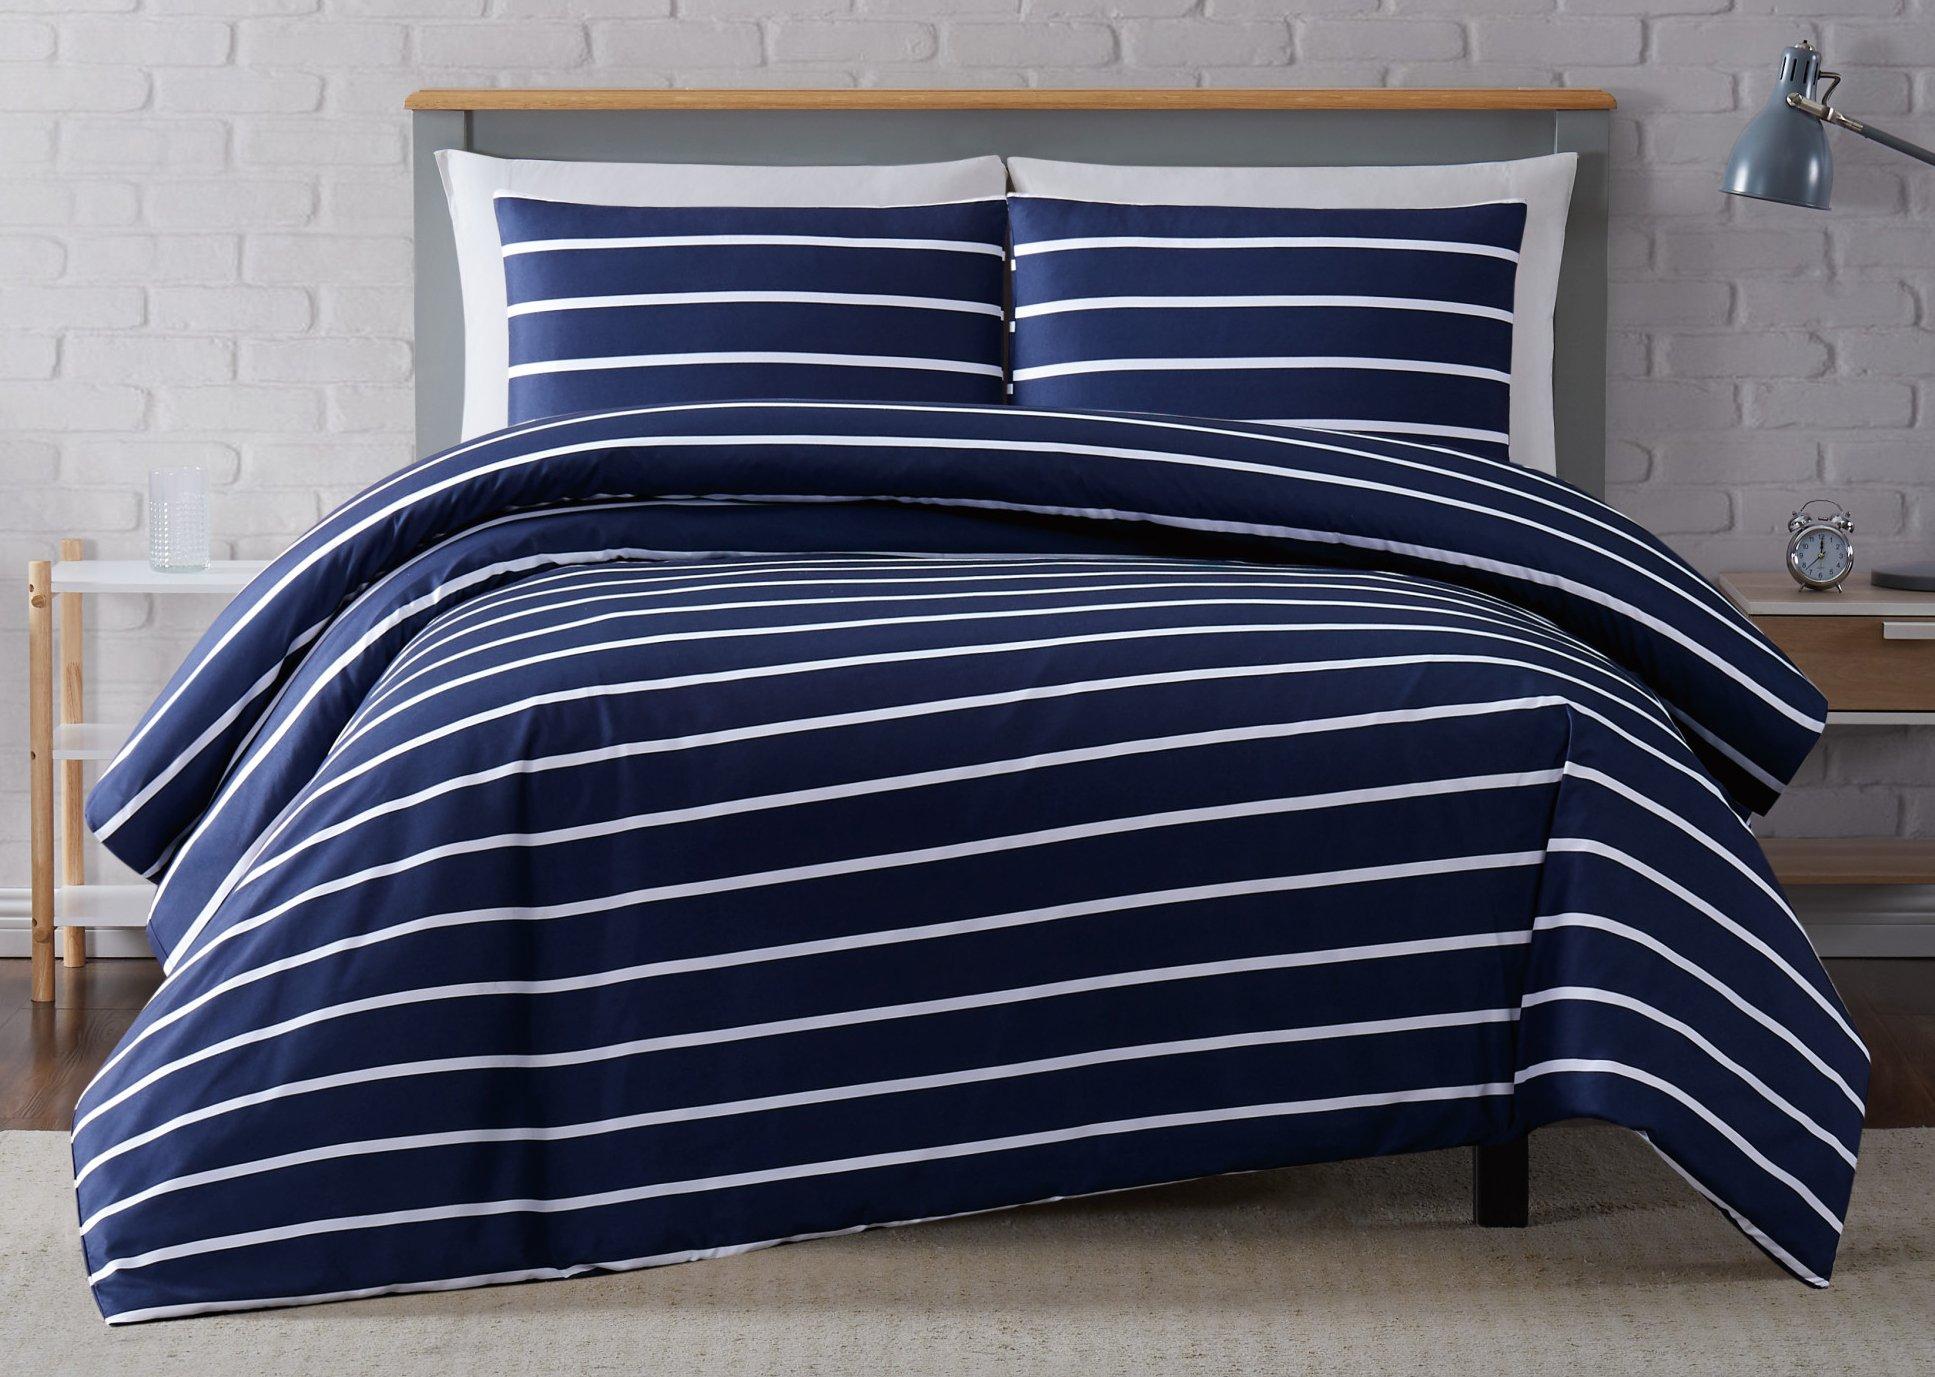 Photos - Bed Linen Truly Soft Maddow Stripe Duvet Cover Set